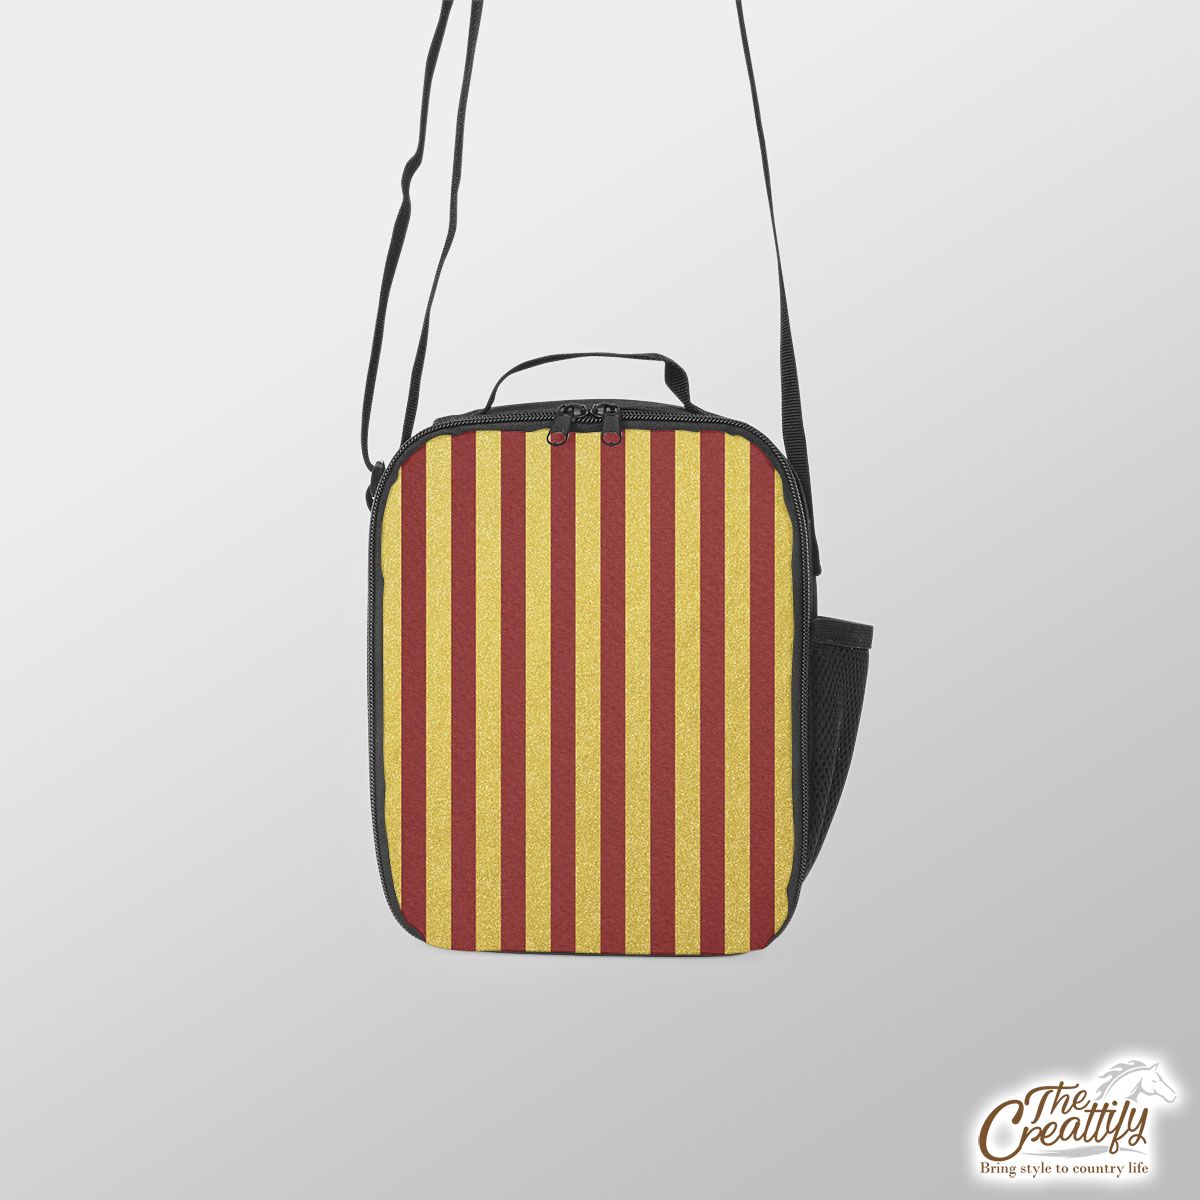 Christmas Gift Ideas, Christmas Gold, Gold Sparkle, Striped Gold On Red Lunch Box Bag